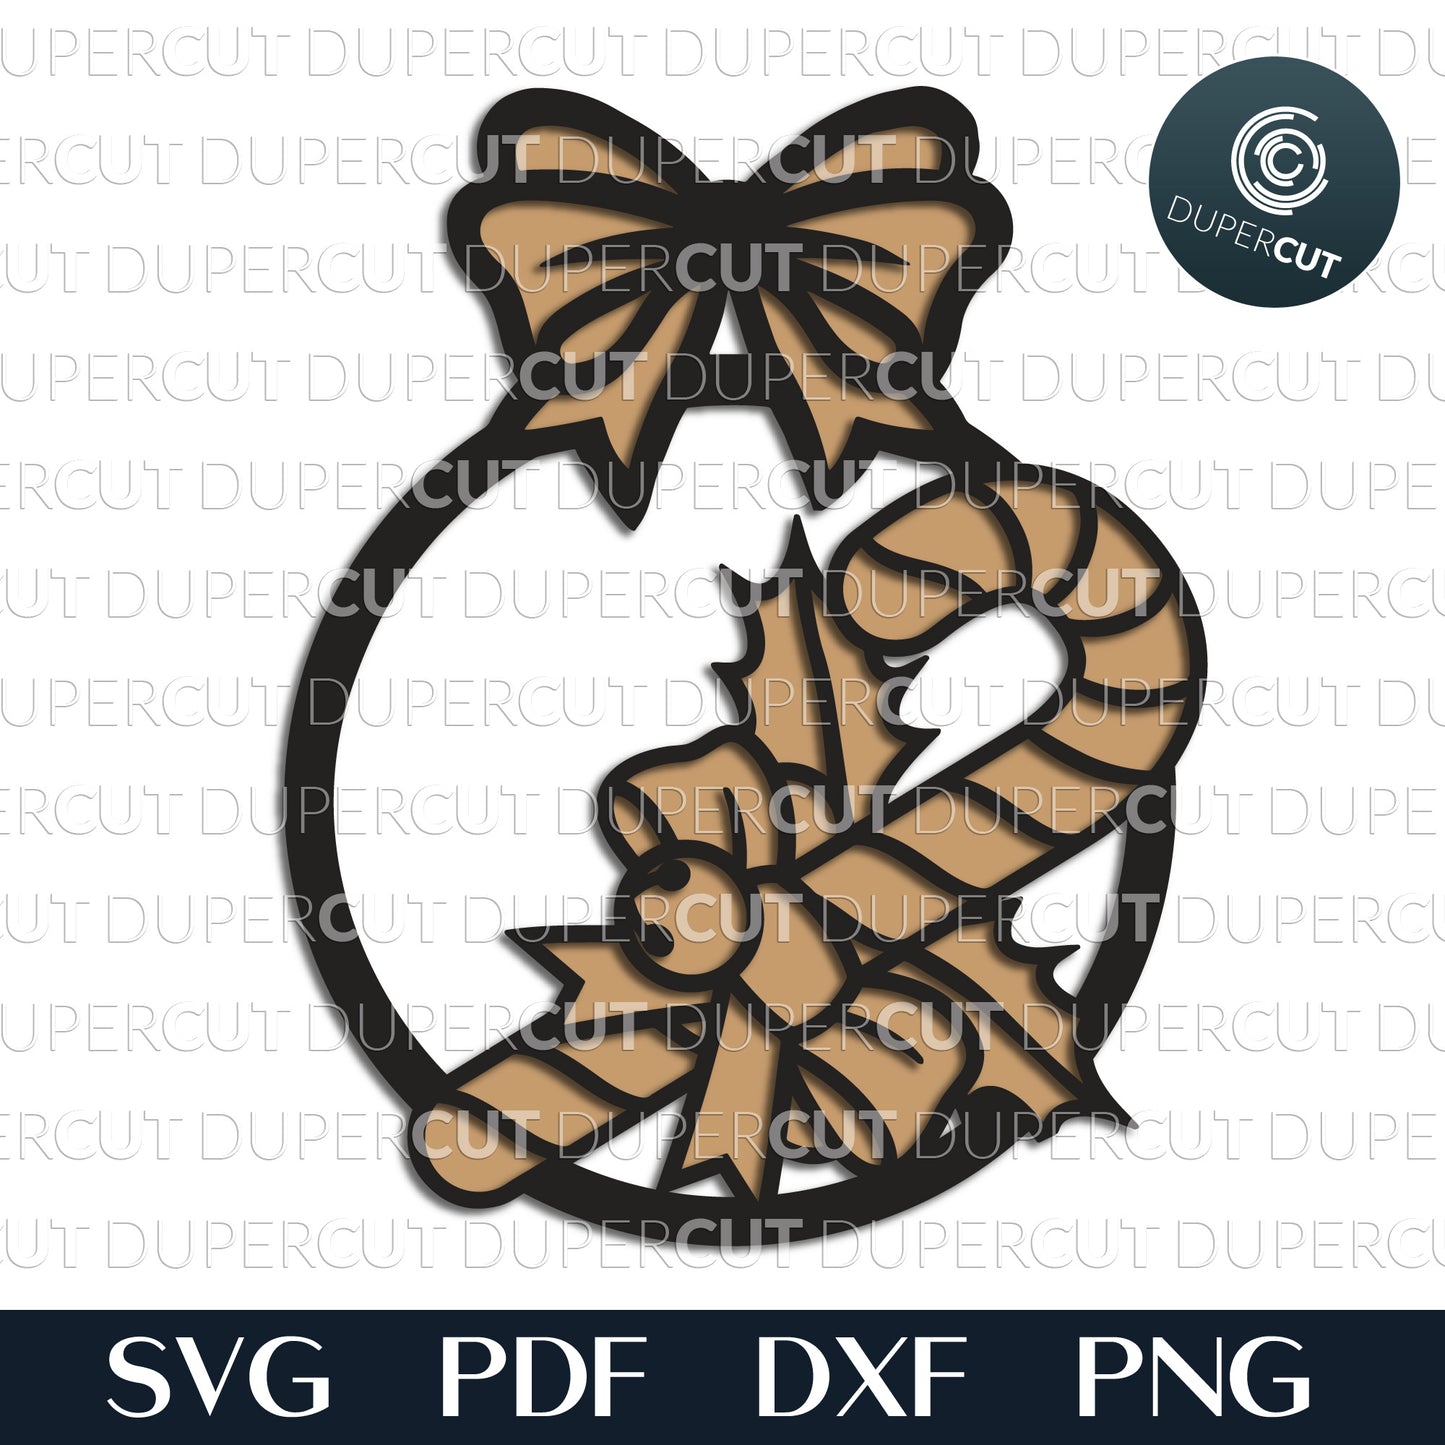 Candy cane ornament - layered cutting template - SVG DXF PDF vector files for laser engraving and cutting, Glowforge, Cricut, Silhouette Cameo